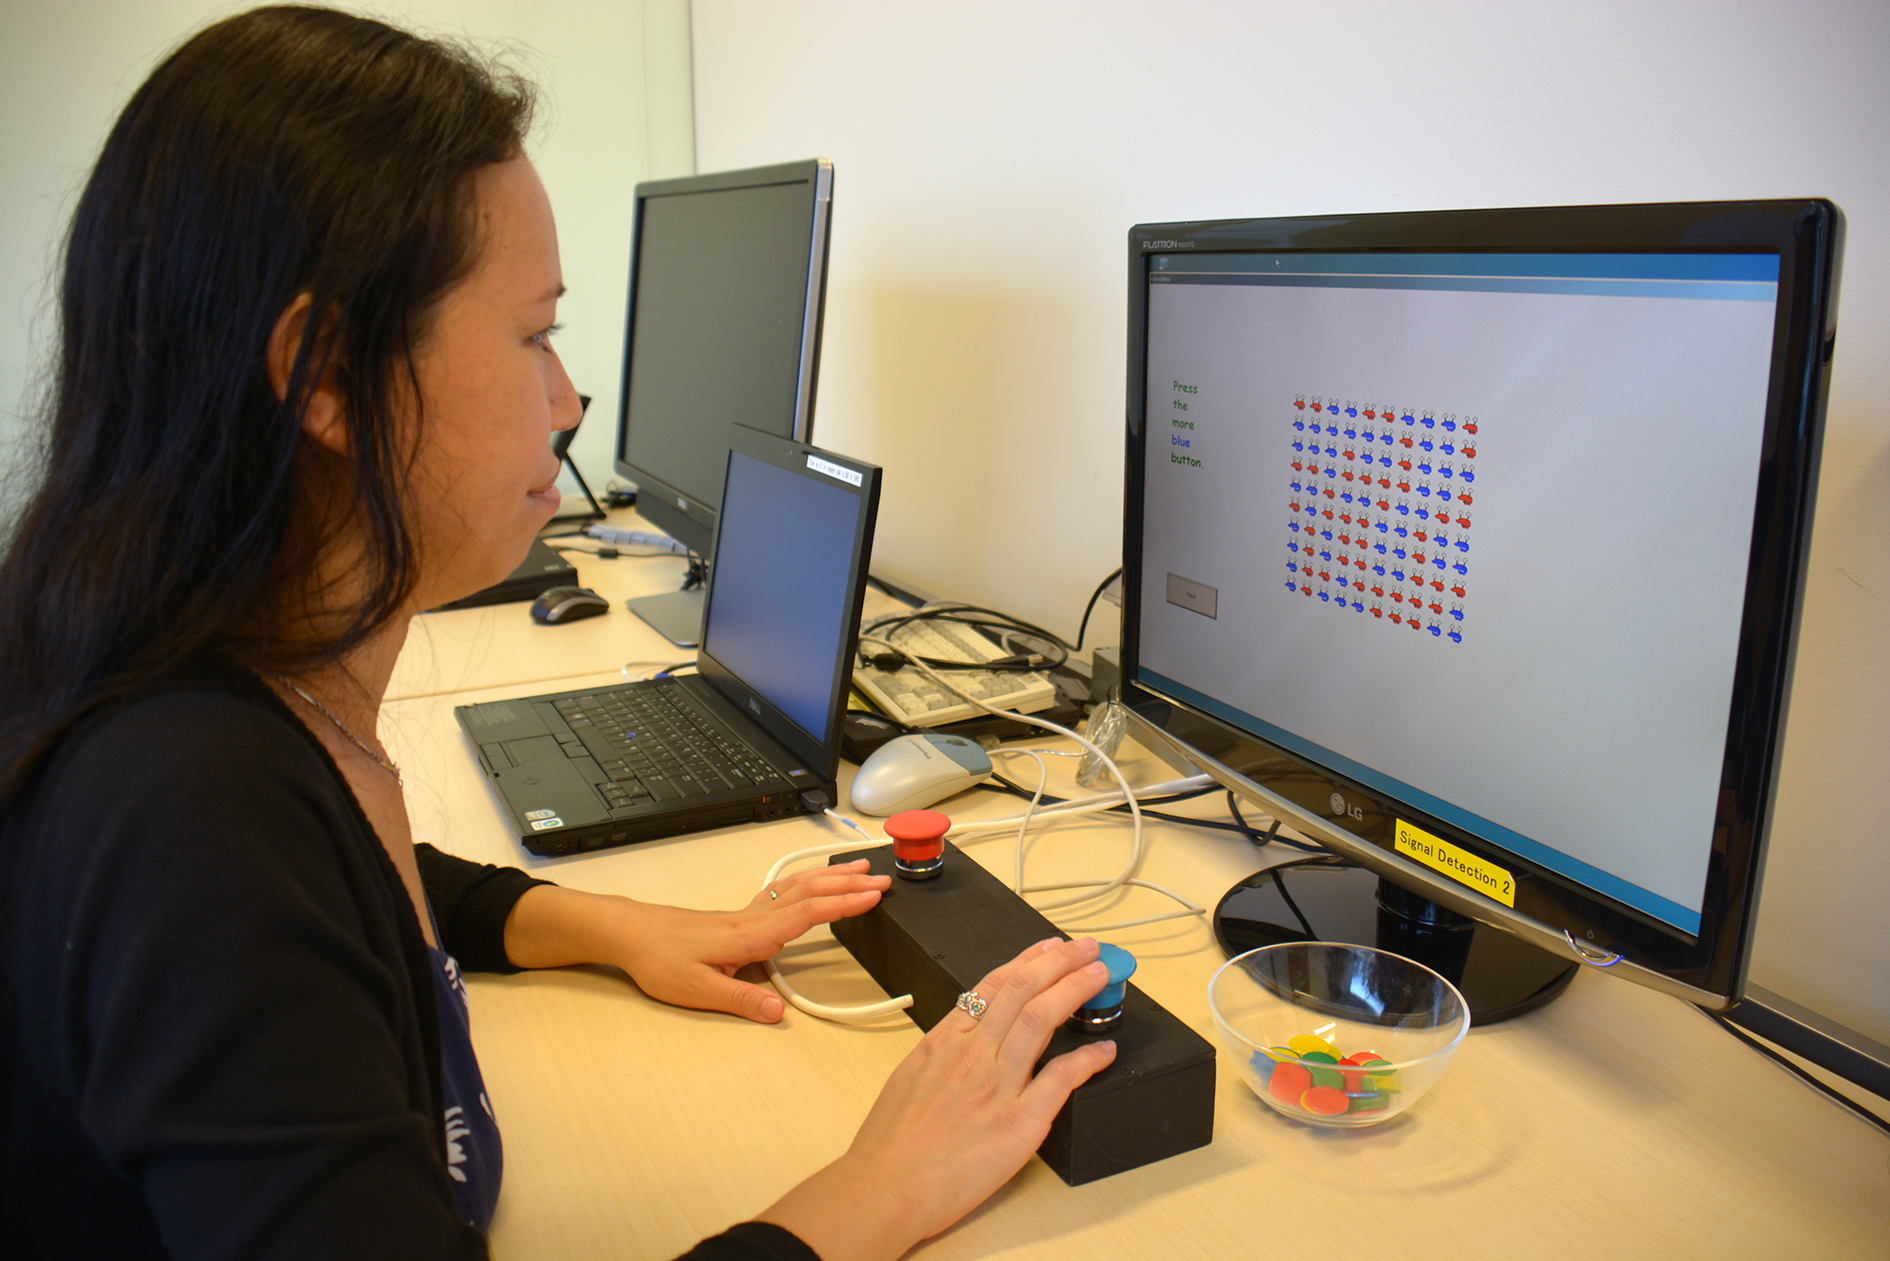 Dr Emi Furukawa, from the Human Developmental Neurobiology Unit, demonstrates the game used during the research.